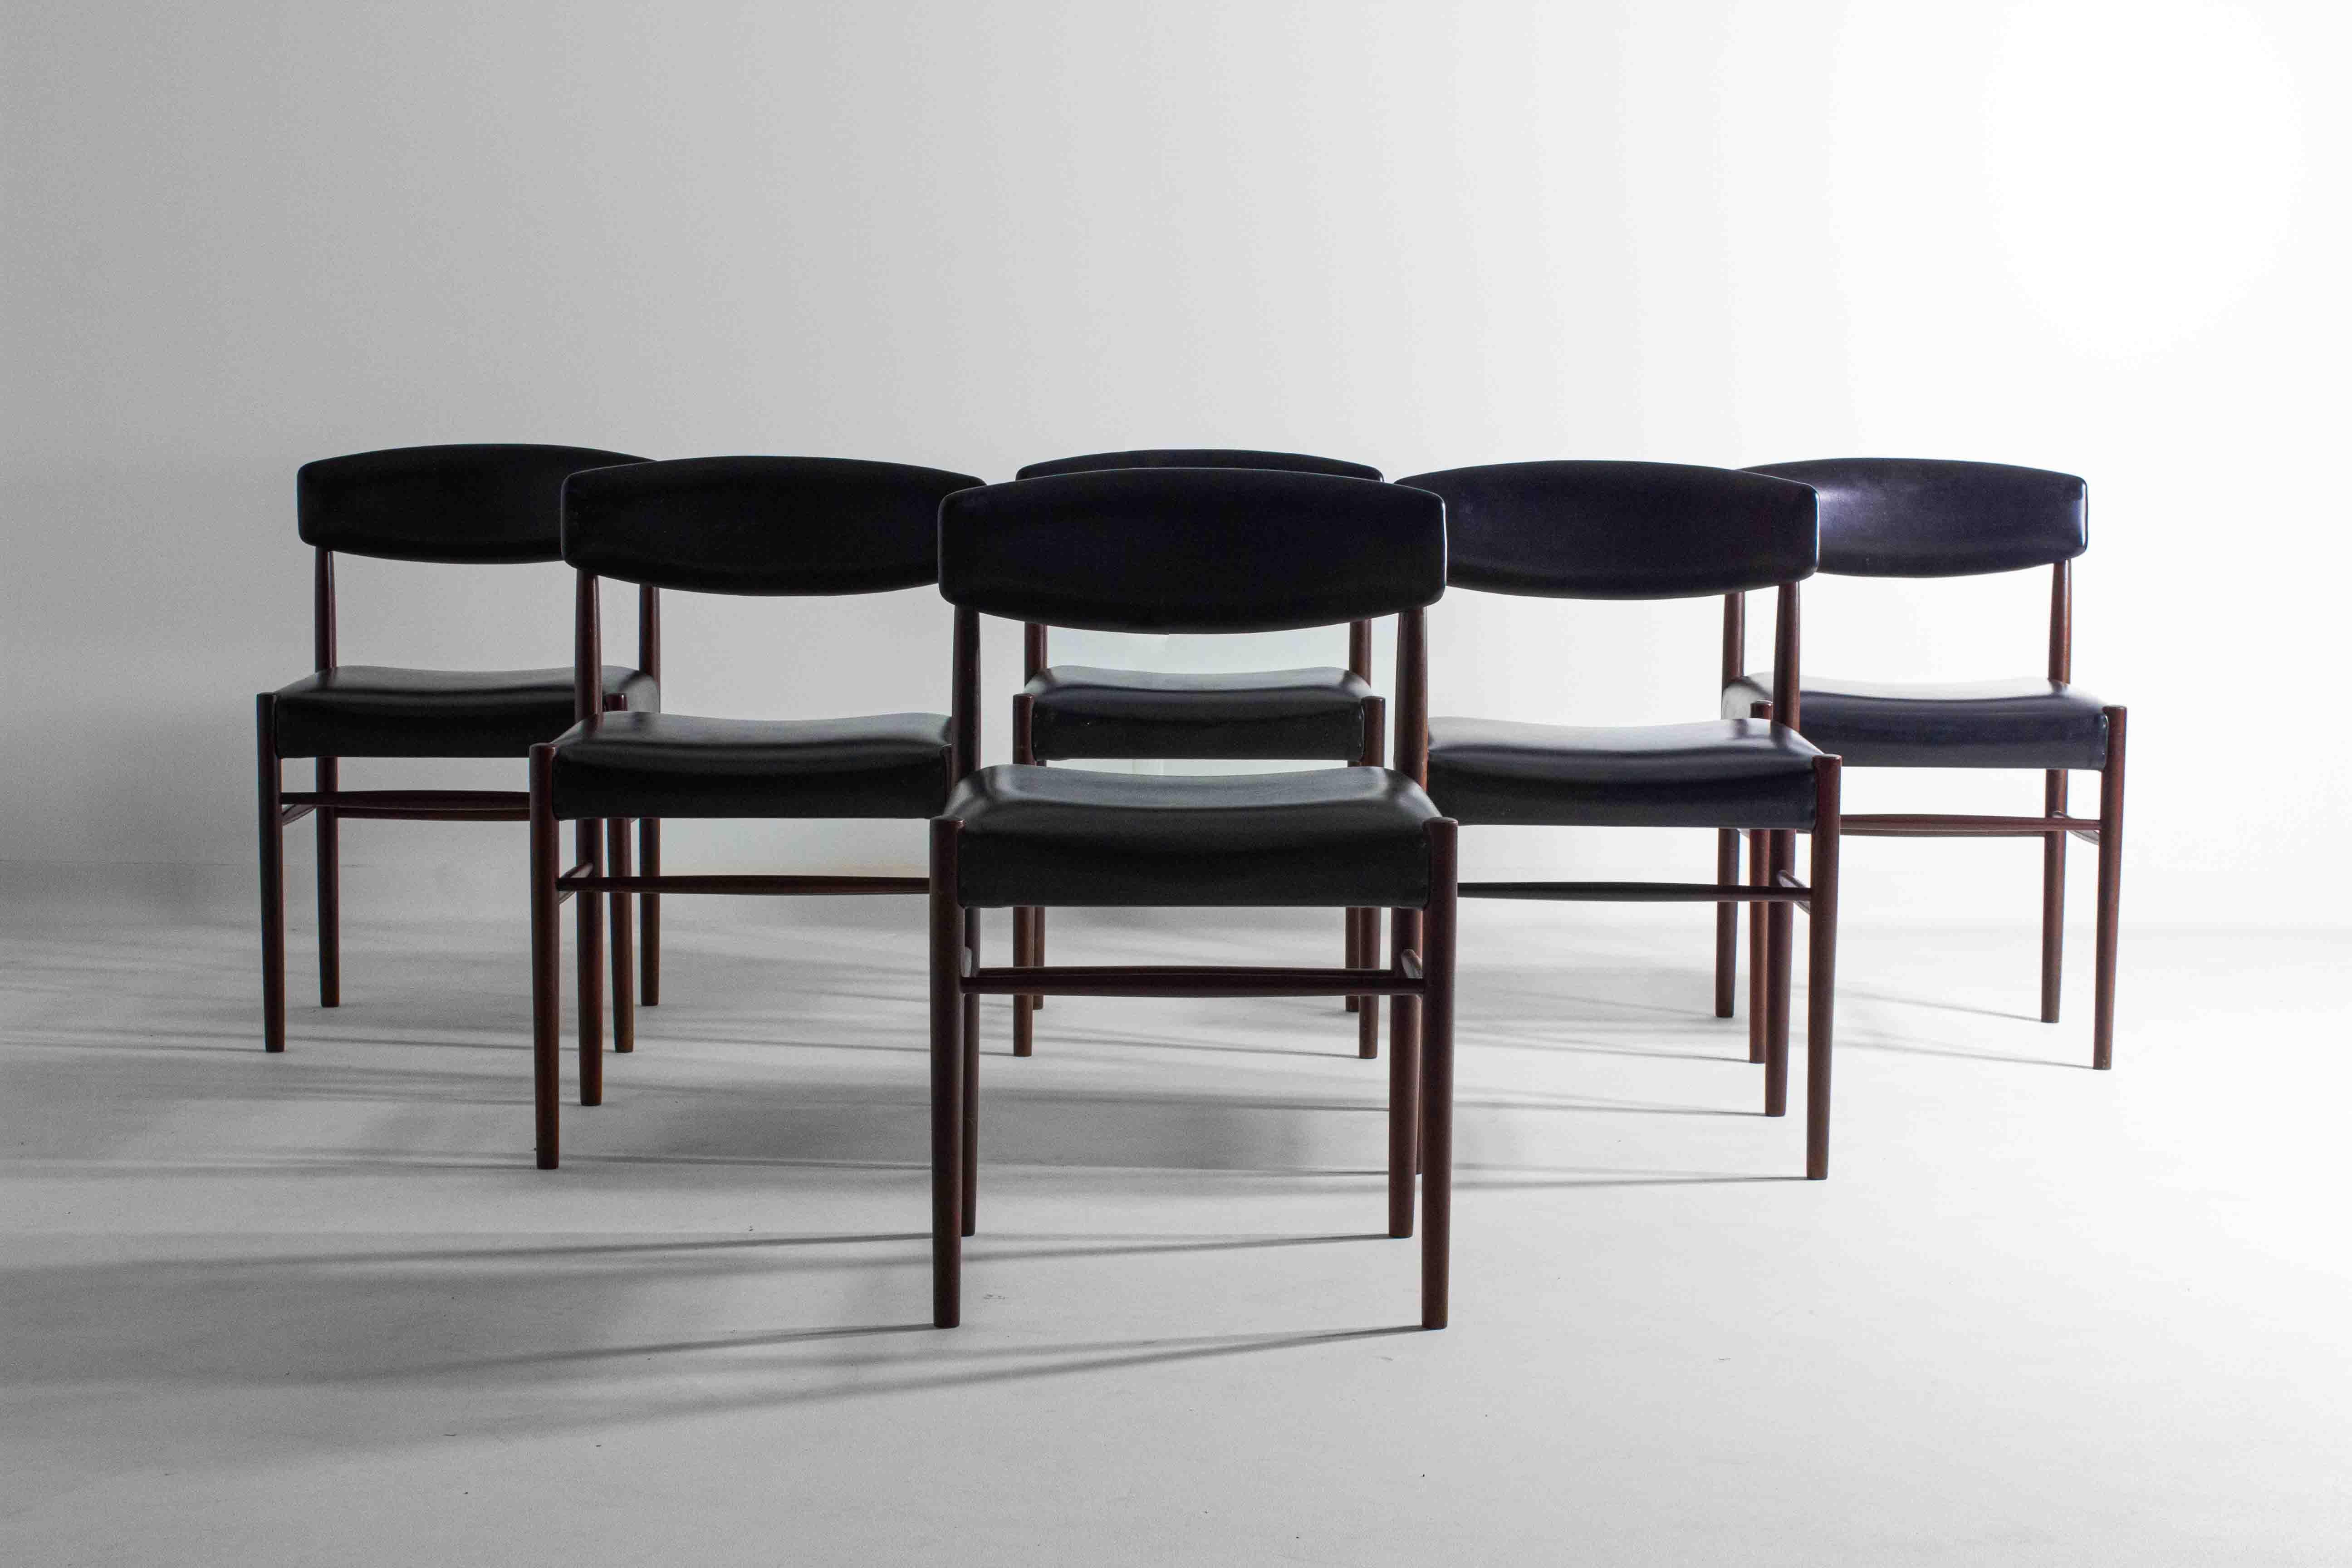 This set of six teak wood chairs designed by Oswald Vermaercke for V-Form combines practicality with classic mid-century style. They’re comfy, with a skai leather upholstery that’s easy to maintain and their timeless design will look great around